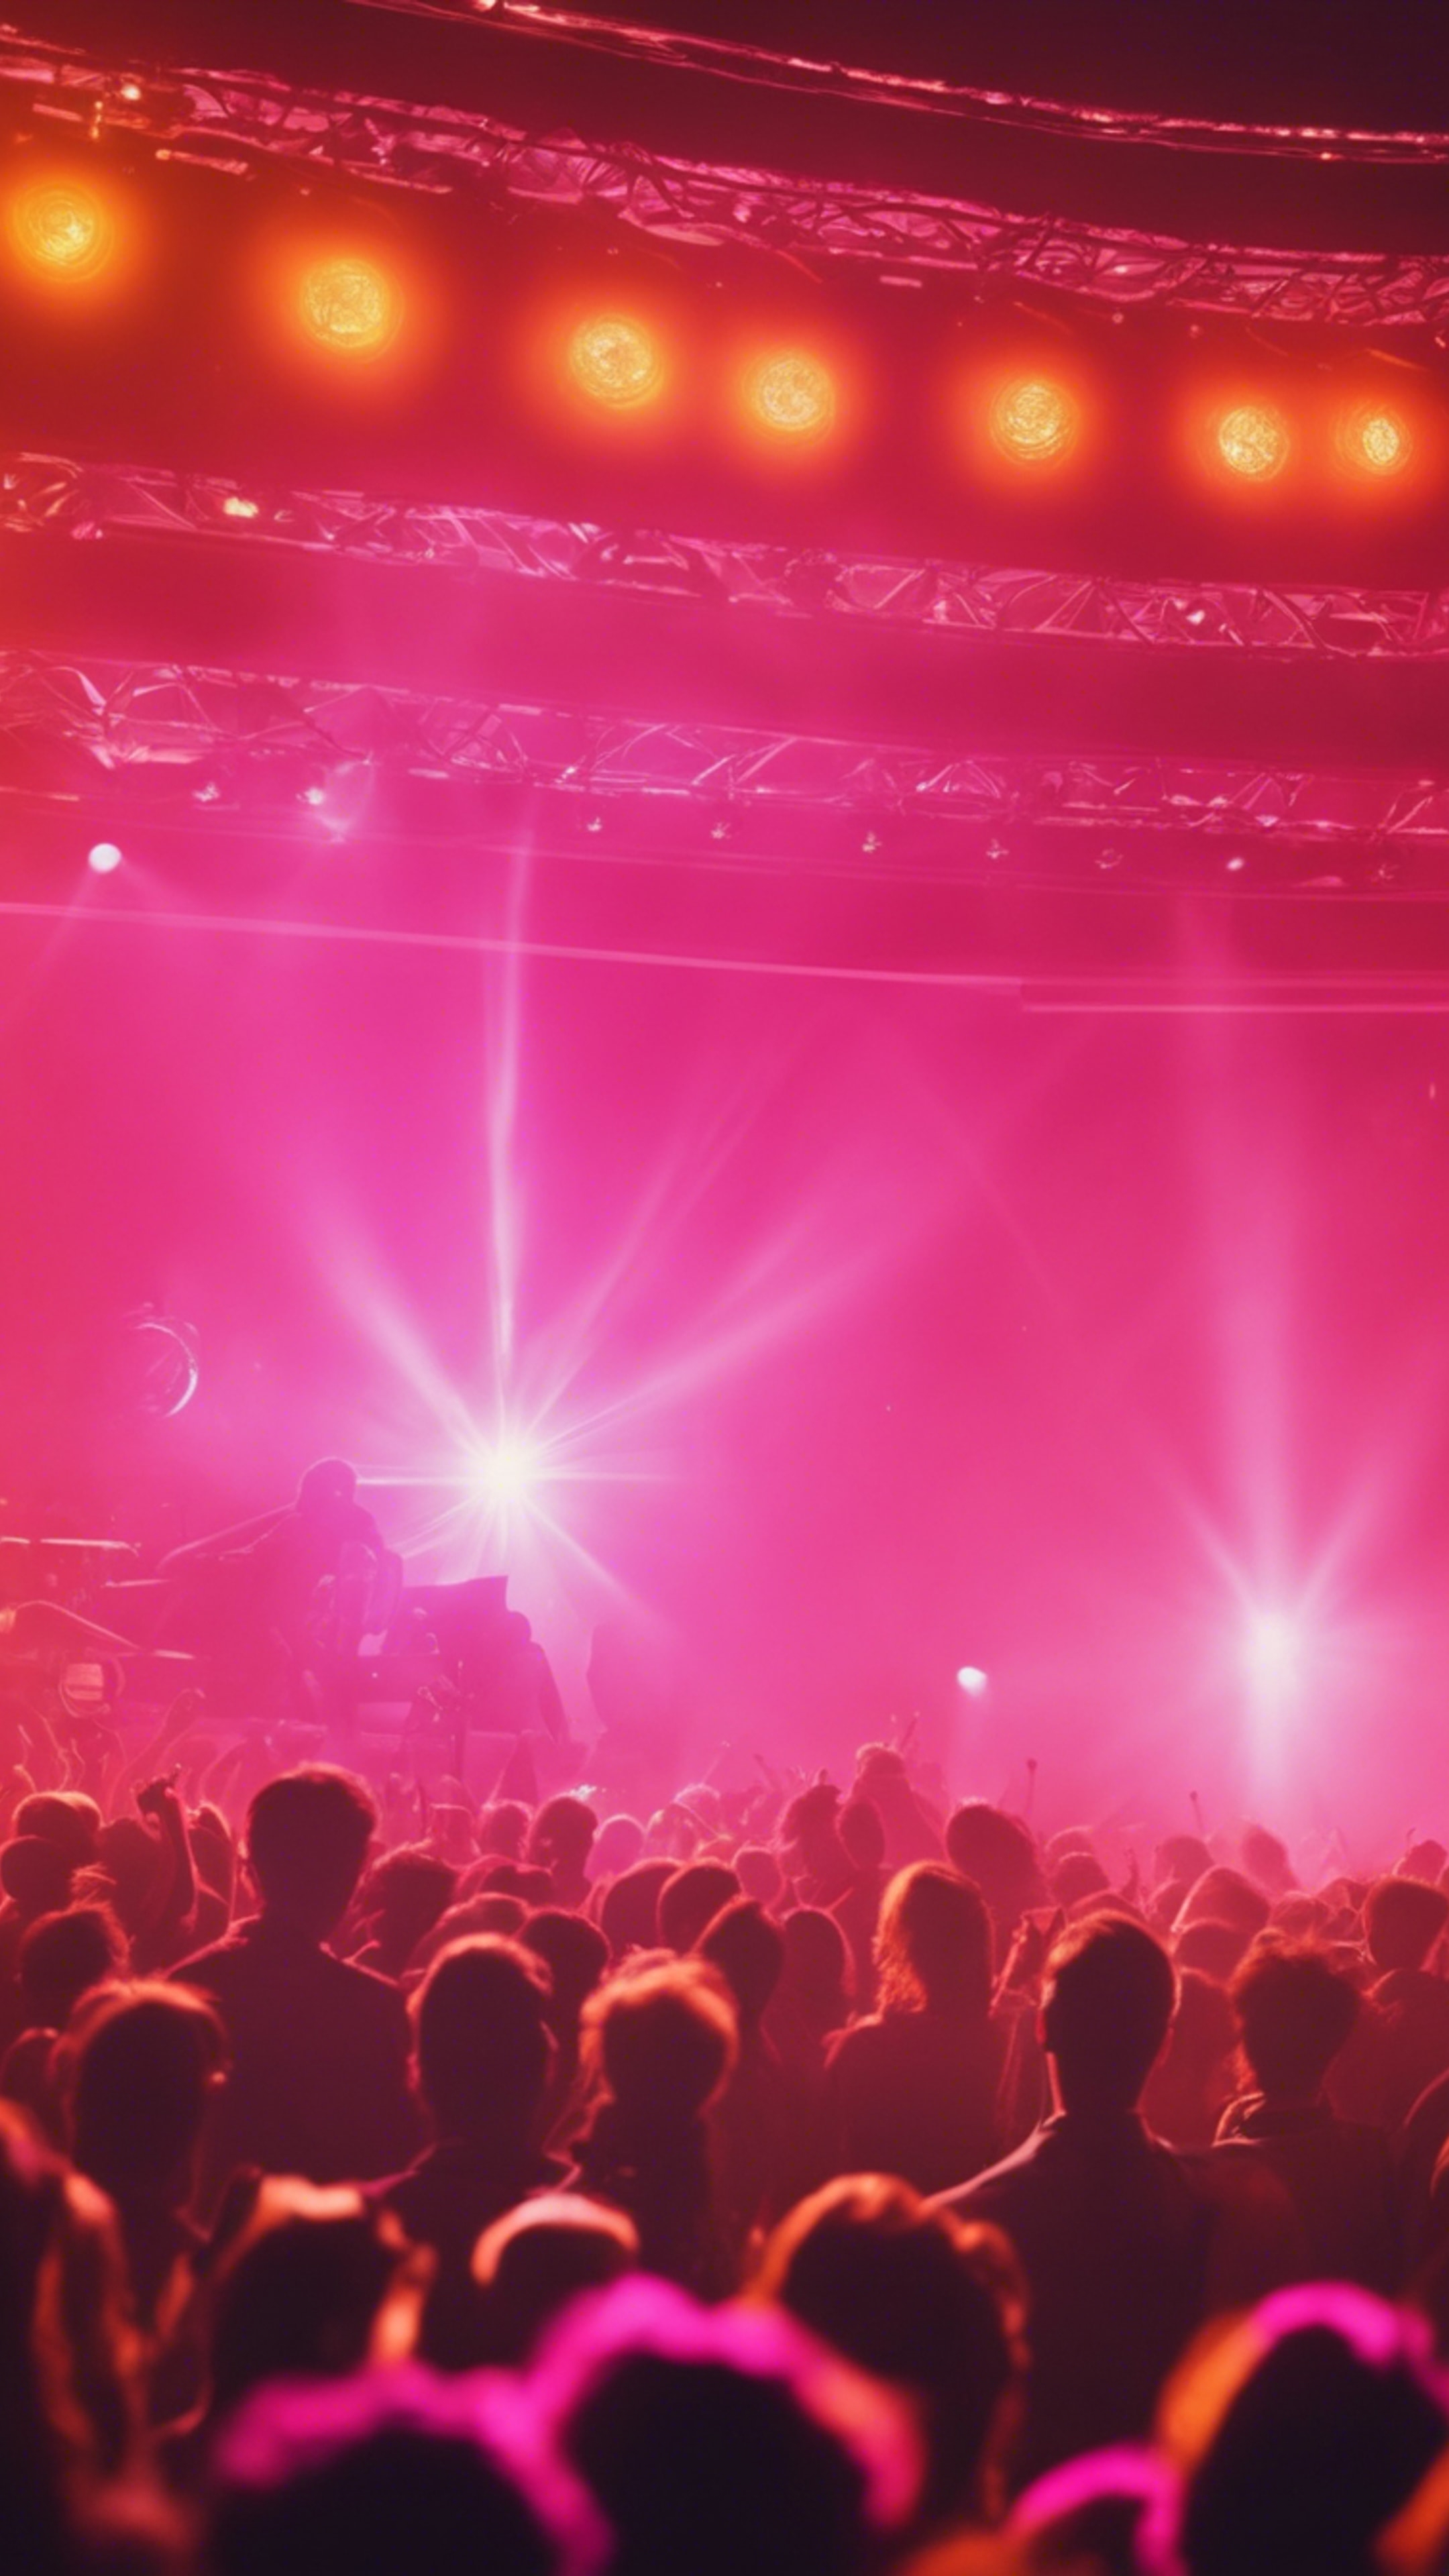 Bright orange flares from an 80s music concert with a pink stage lighting. 墙纸[6011018ba8cb439fb9ea]